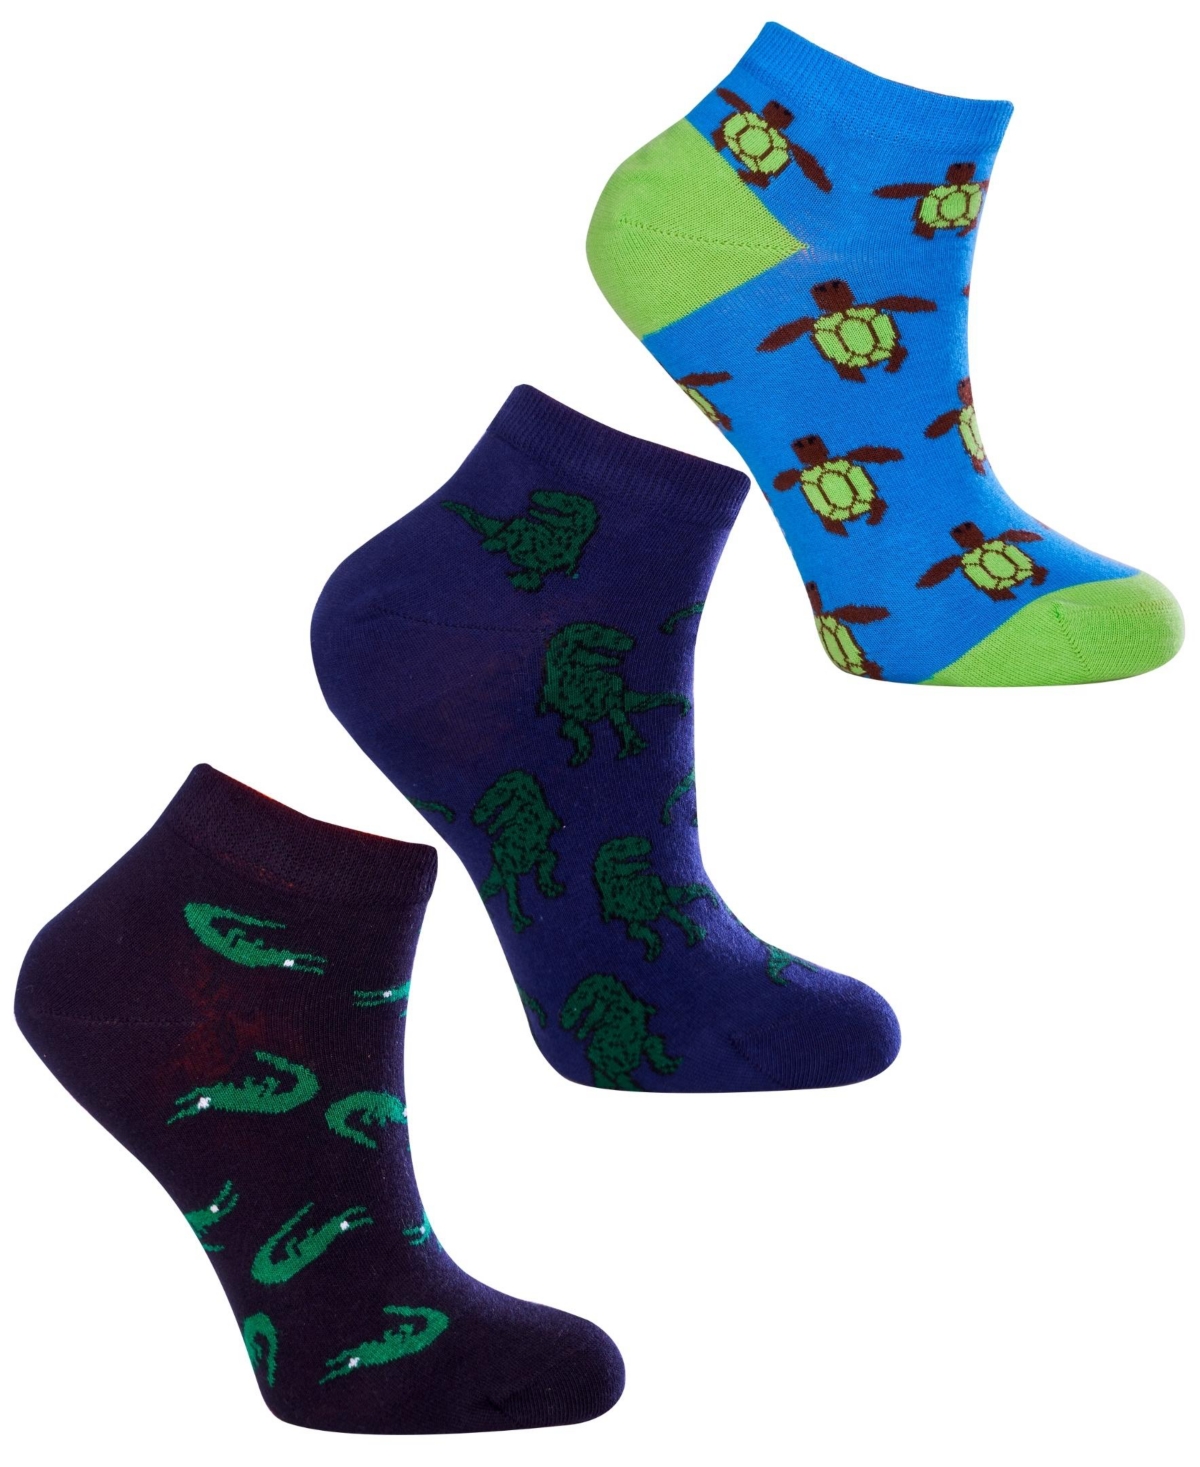 Women's Ankle Bundle 1 W-Cotton Novelty Socks with Seamless Toe, Pack of 3 - Multi Color